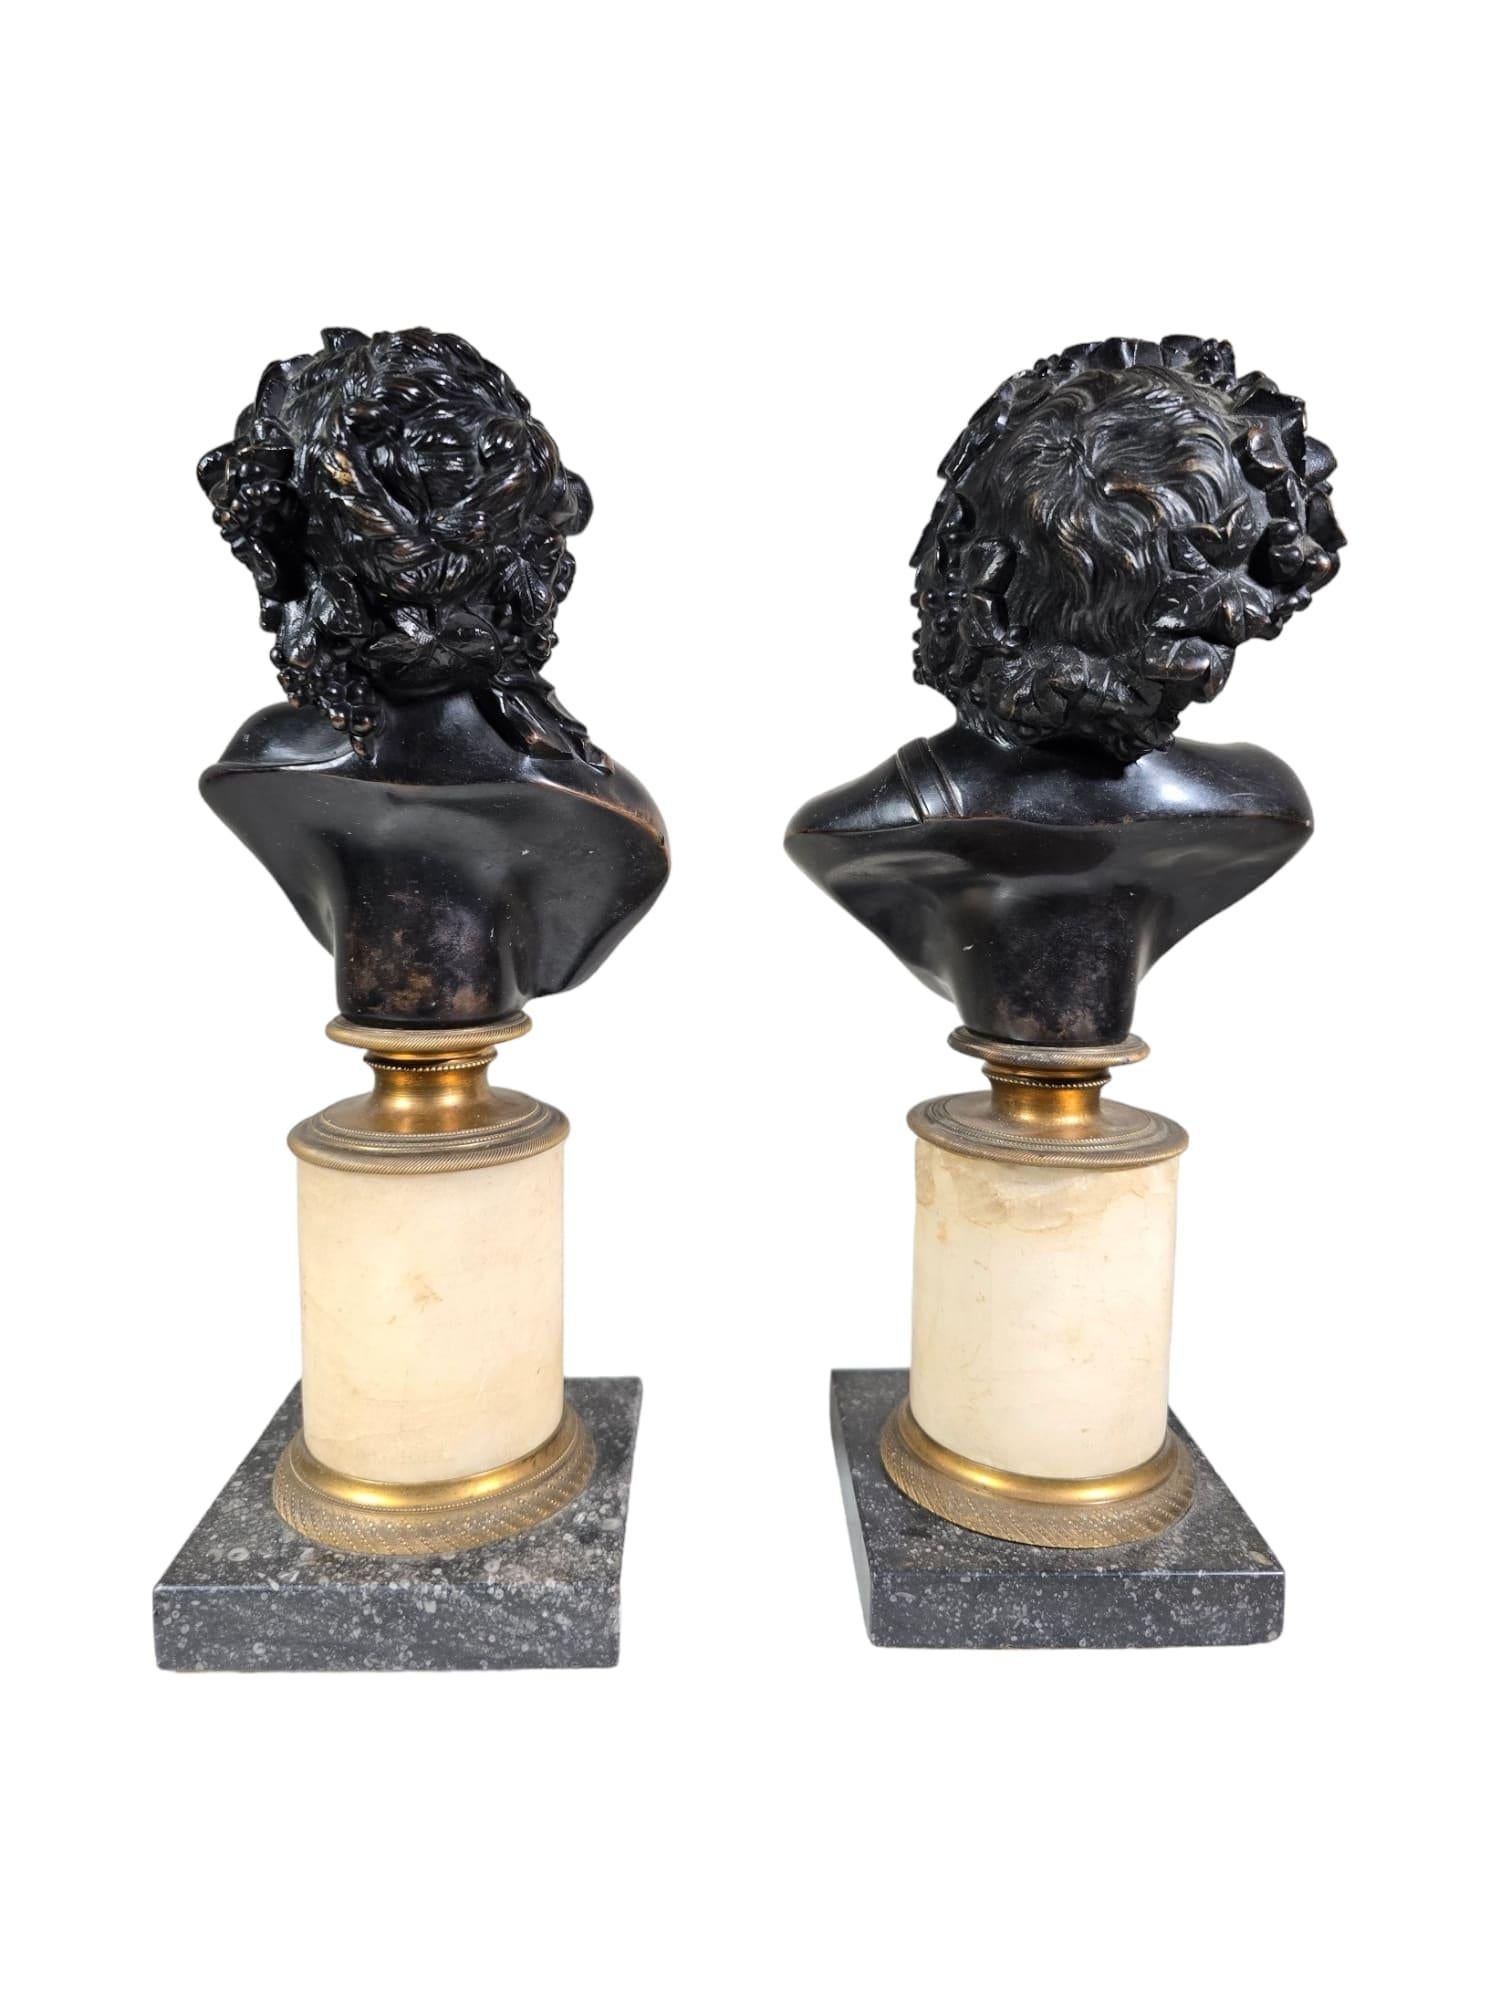 Antique Pair of Italian Bronze Busts: Dionysus and Ariadne, 19th Century For Sale 2